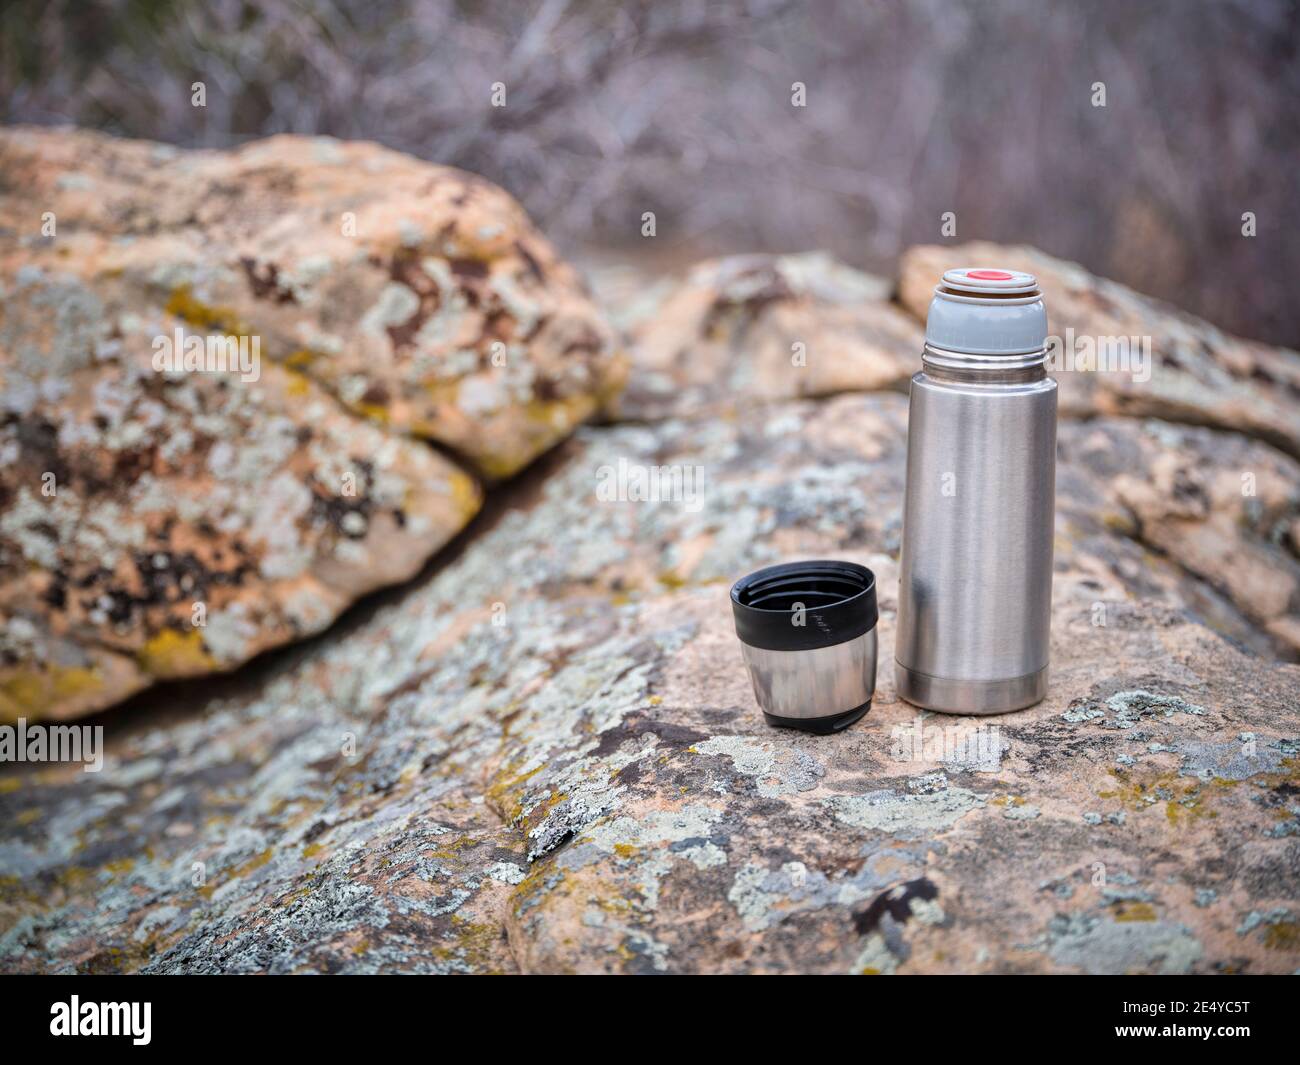 https://c8.alamy.com/comp/2E4YC5T/small-steel-thermos-bottle-and-hot-tea-on-a-rock-during-cold-season-hiking-2E4YC5T.jpg